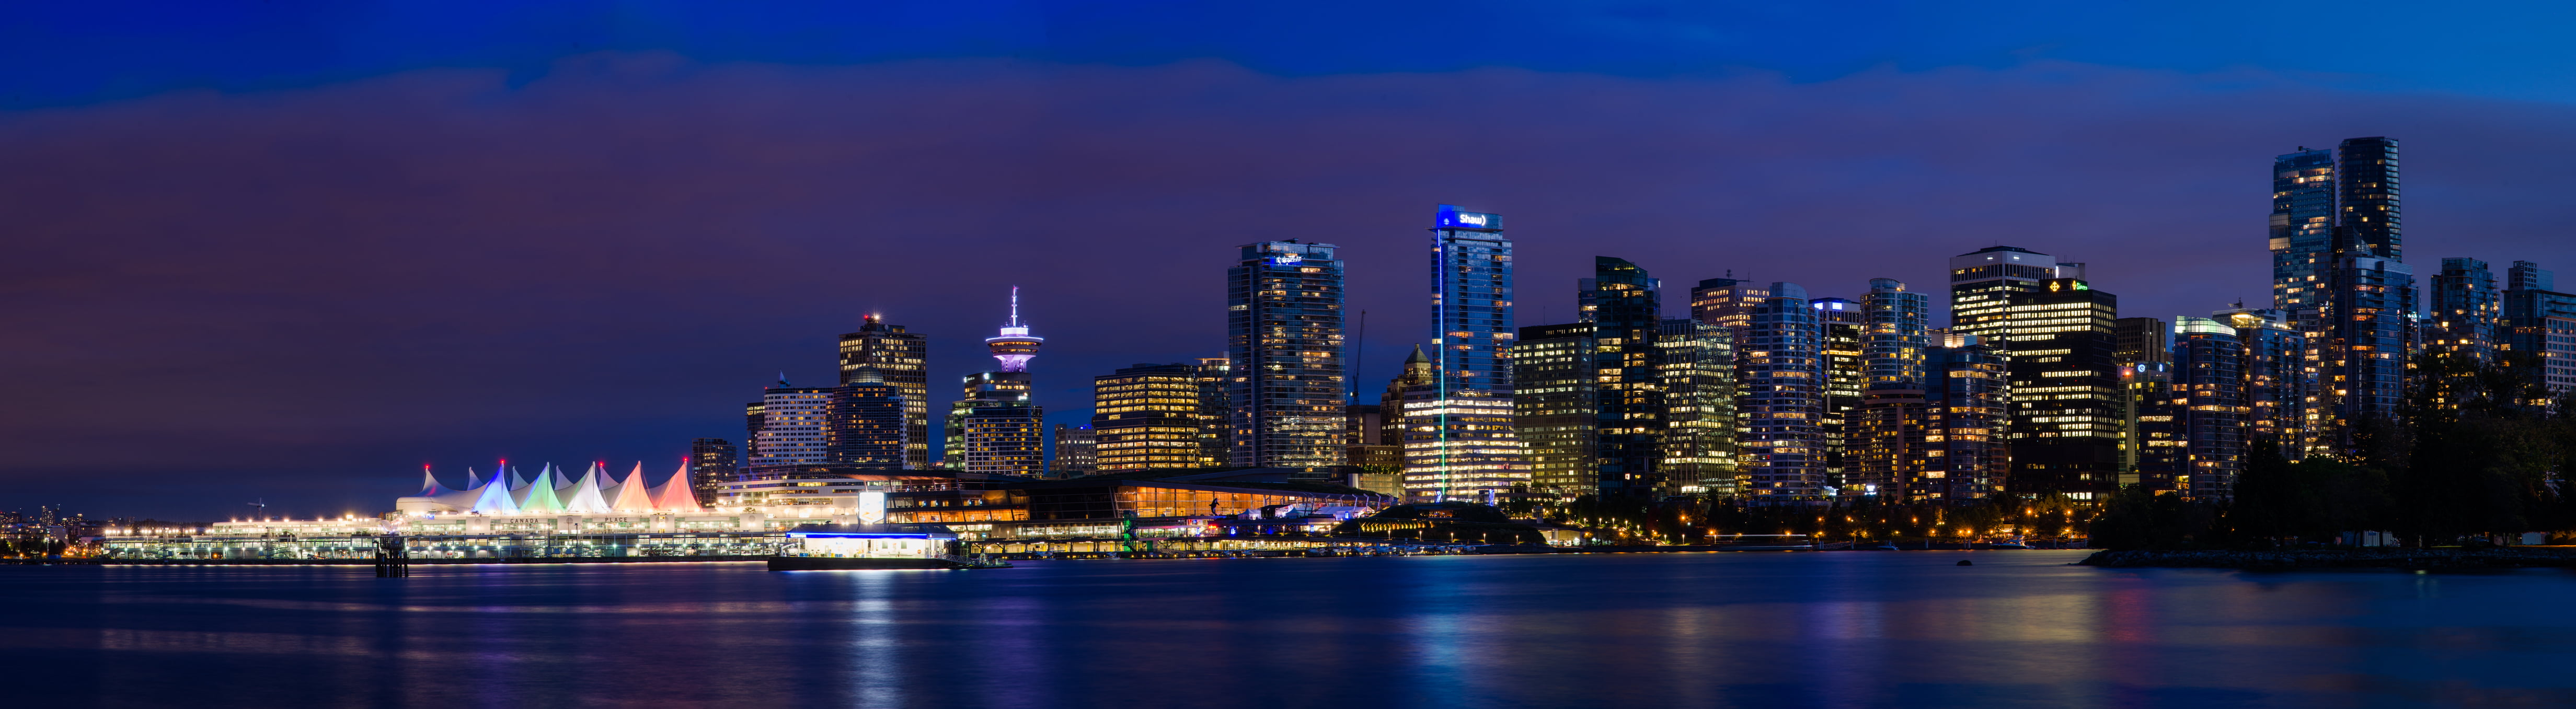 panoramic photography of city buildings during night time, Vancity